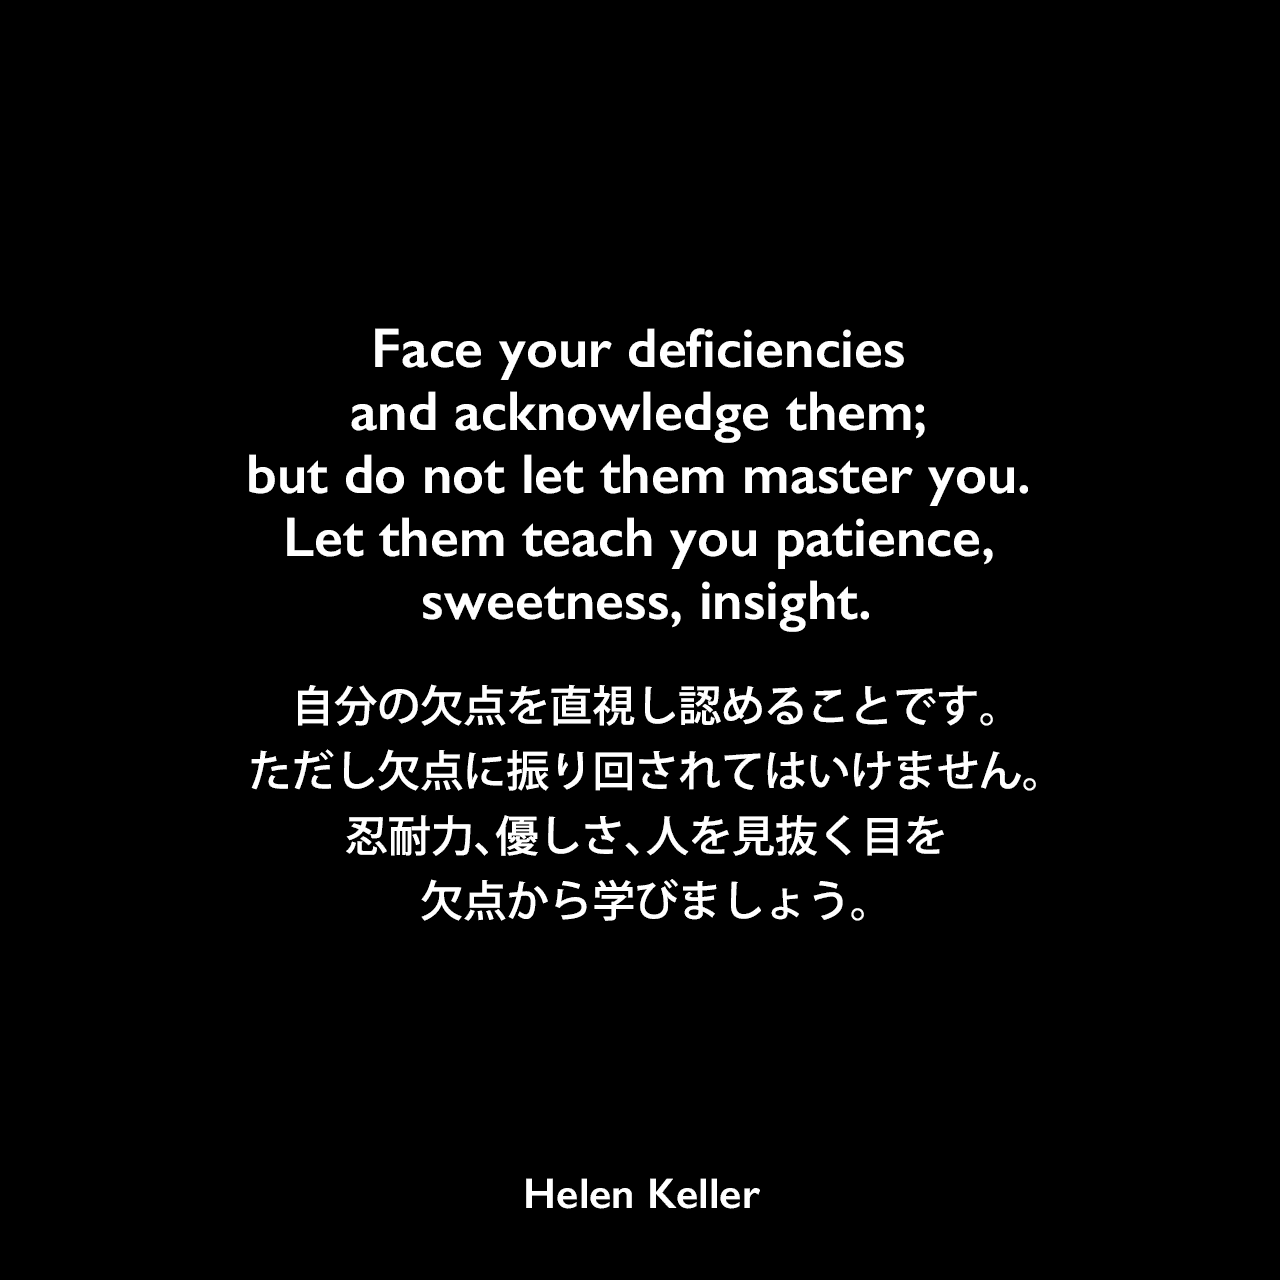 Face your deficiencies and acknowledge them; but do not let them master you. Let them teach you patience, sweetness, insight.自分の欠点を直視し認めることです。ただし欠点に振り回されてはいけません。忍耐力、優しさ、人を見抜く目を欠点から学びましょう。Helen Keller